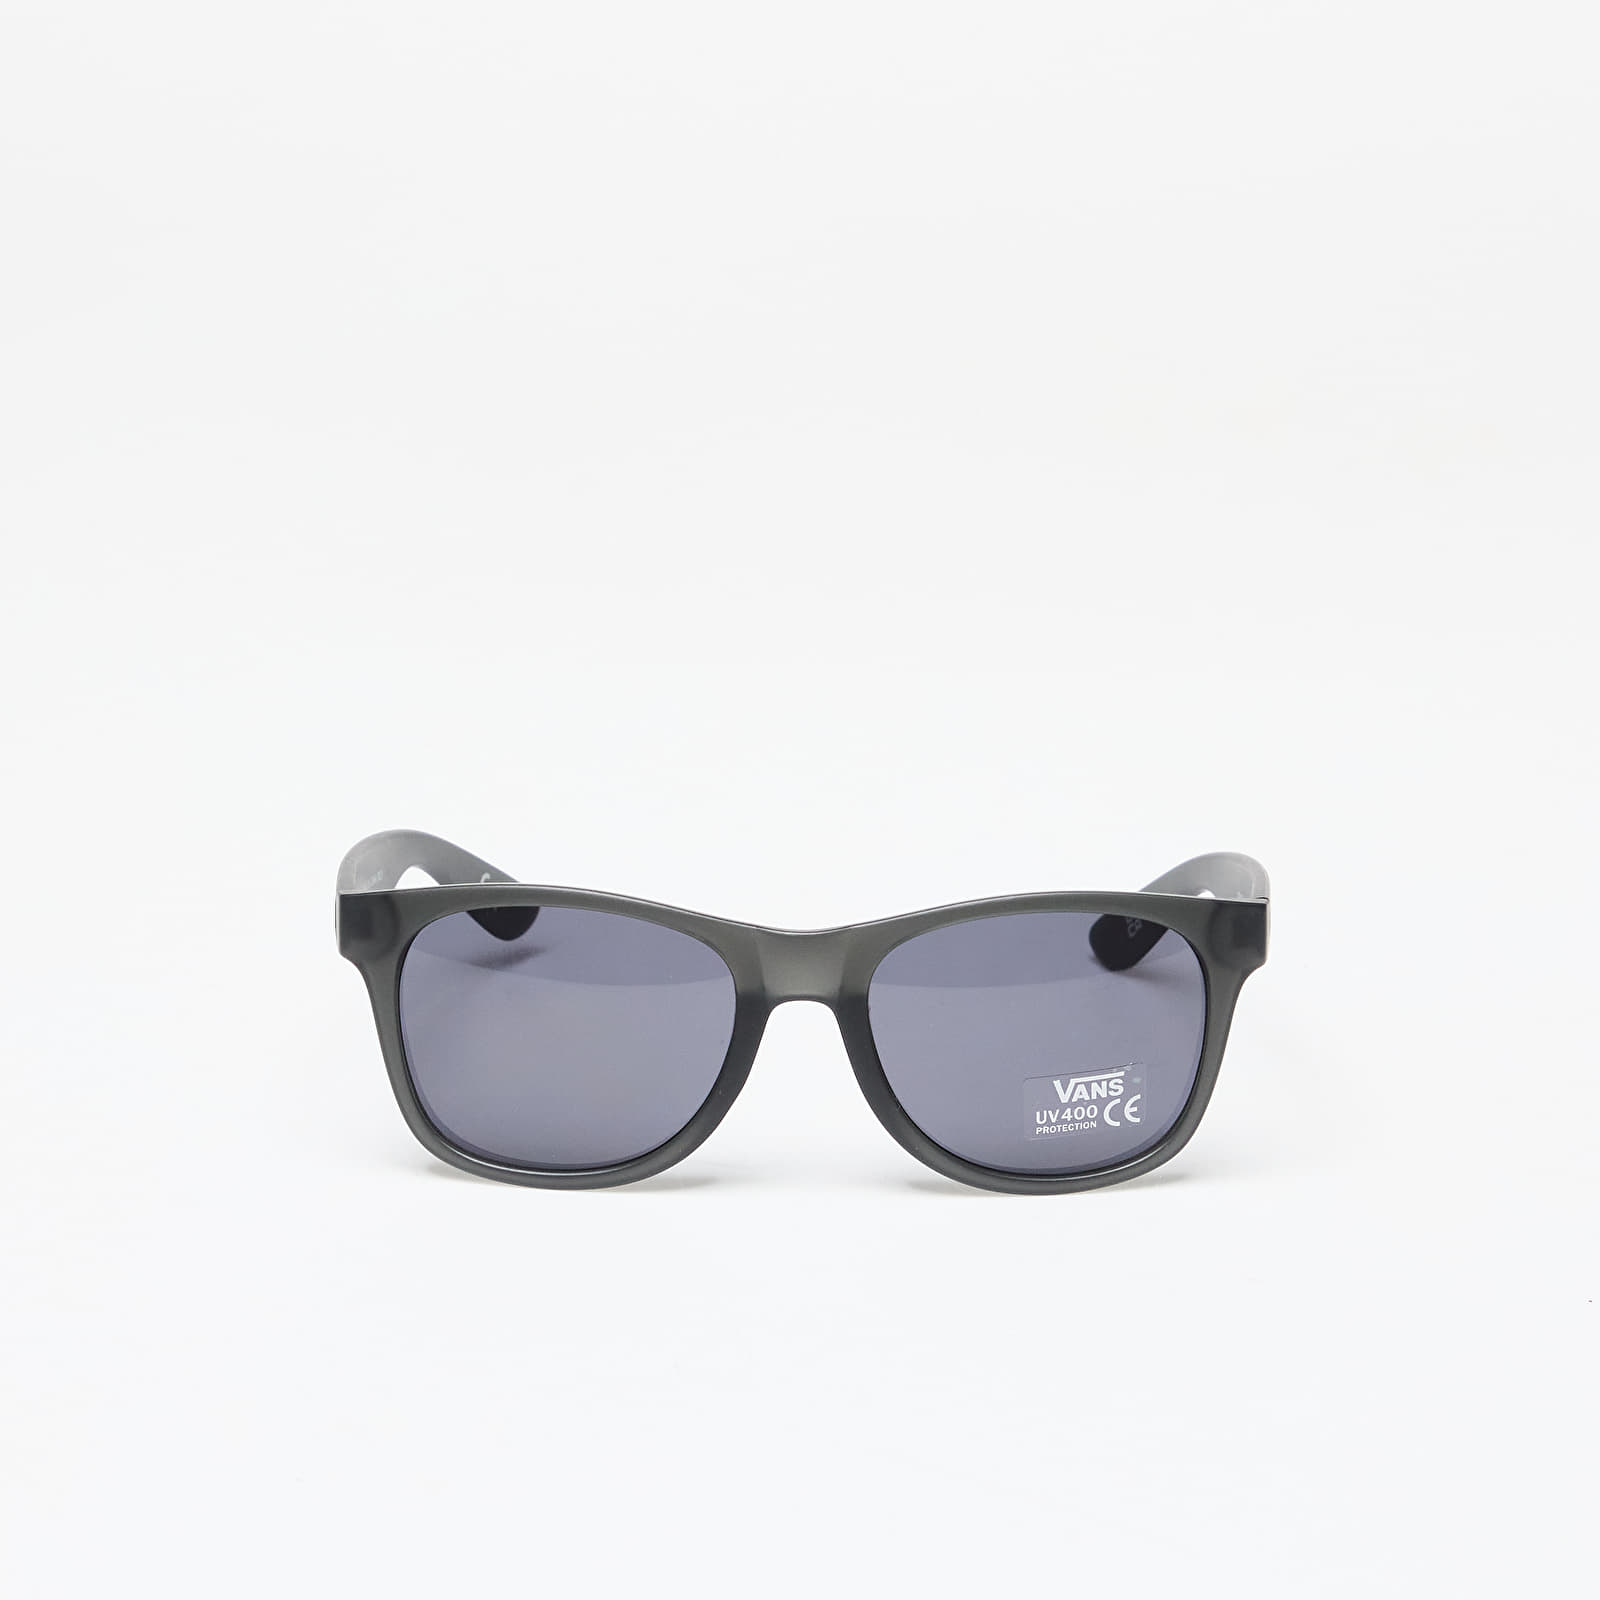 Sunglasses Vans Spicoli 4 Shade Black Frosted T